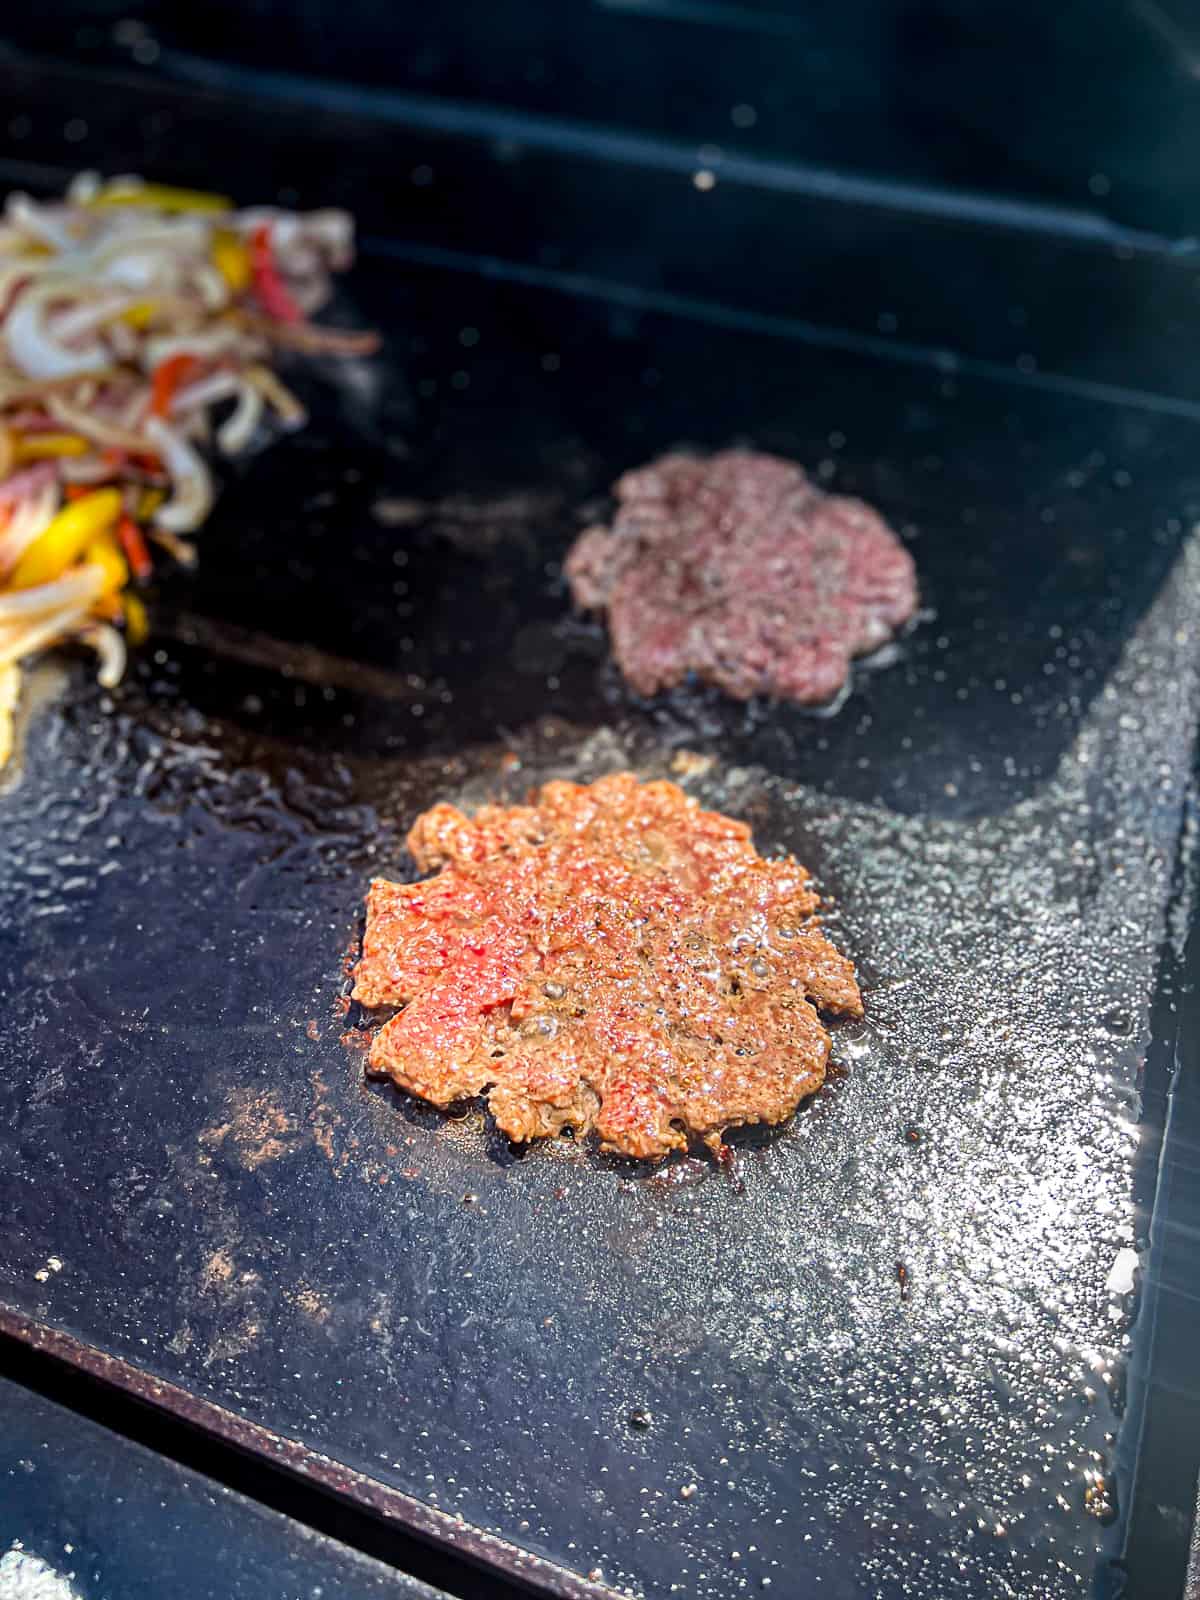 Traeger Flatrock Griddle Cooking Breakfast Burgers Smashed on the flattop with onions and peppers 